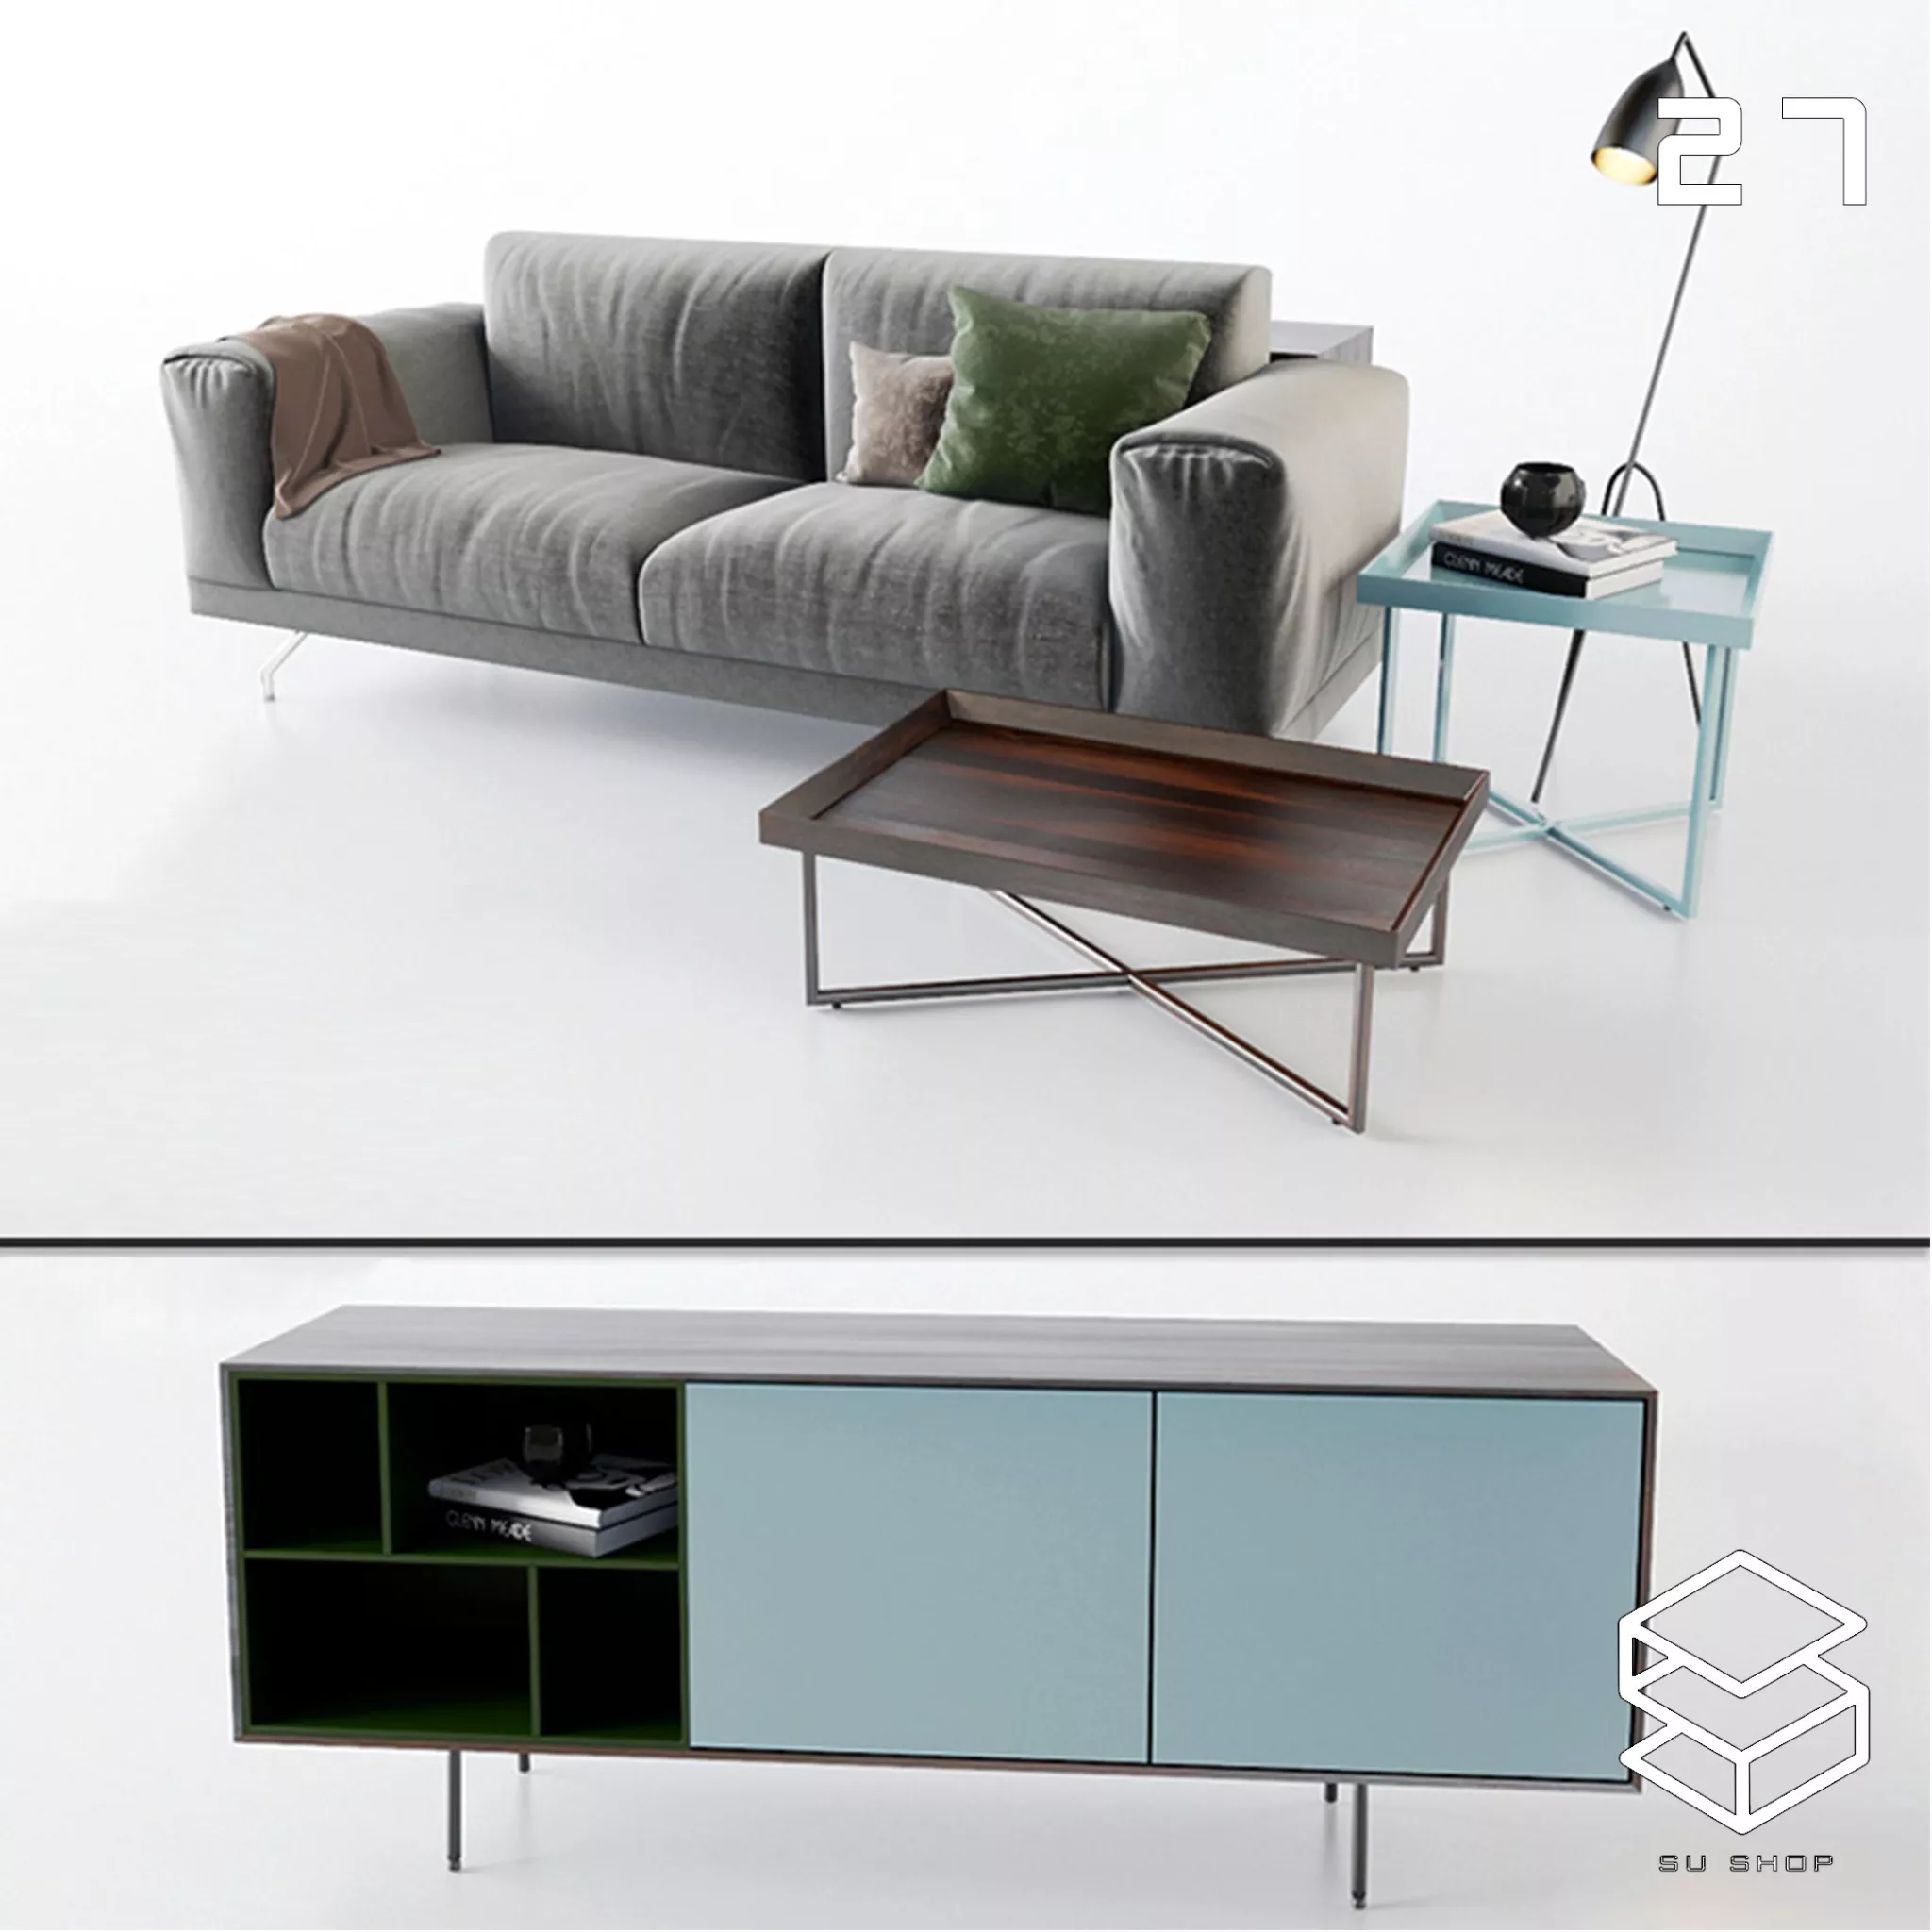 MODERN SOFA - SKETCHUP 3D MODEL - VRAY OR ENSCAPE - ID13574